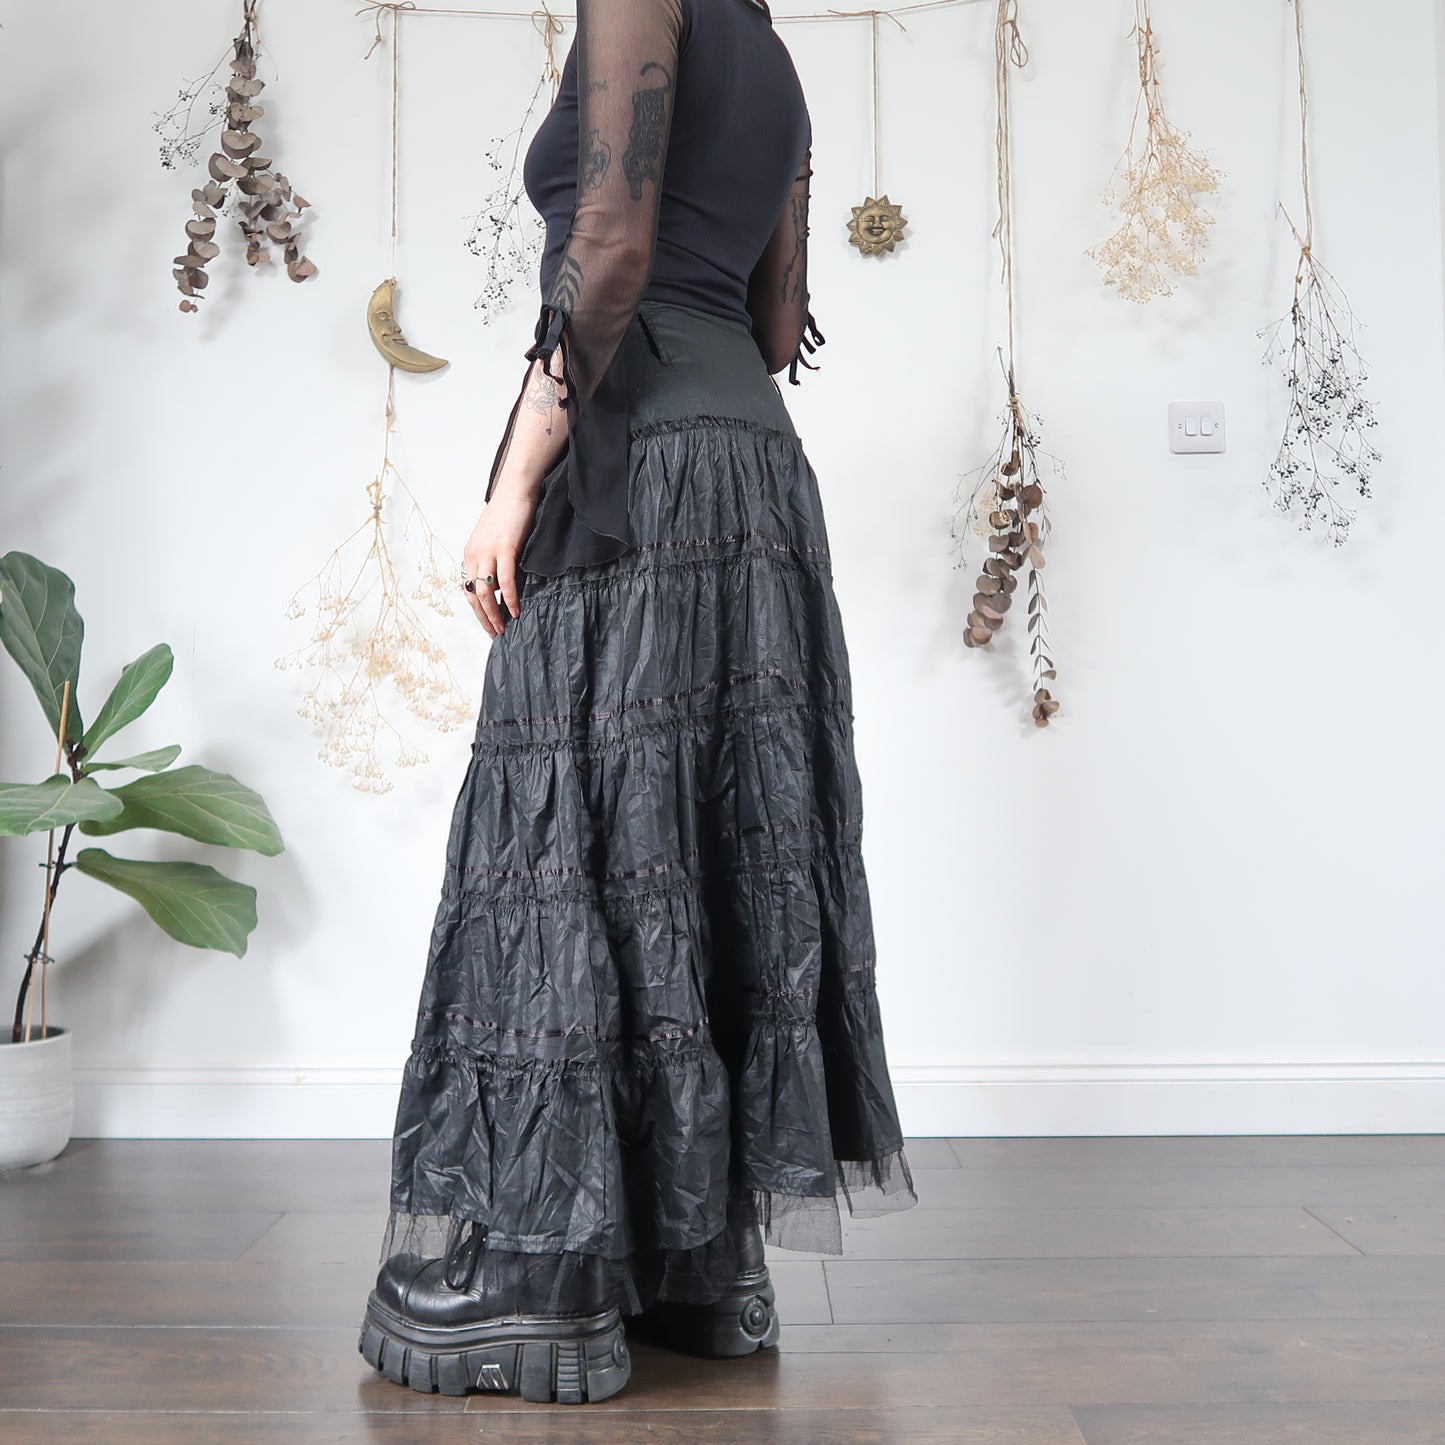 Black tiered skirt - size M